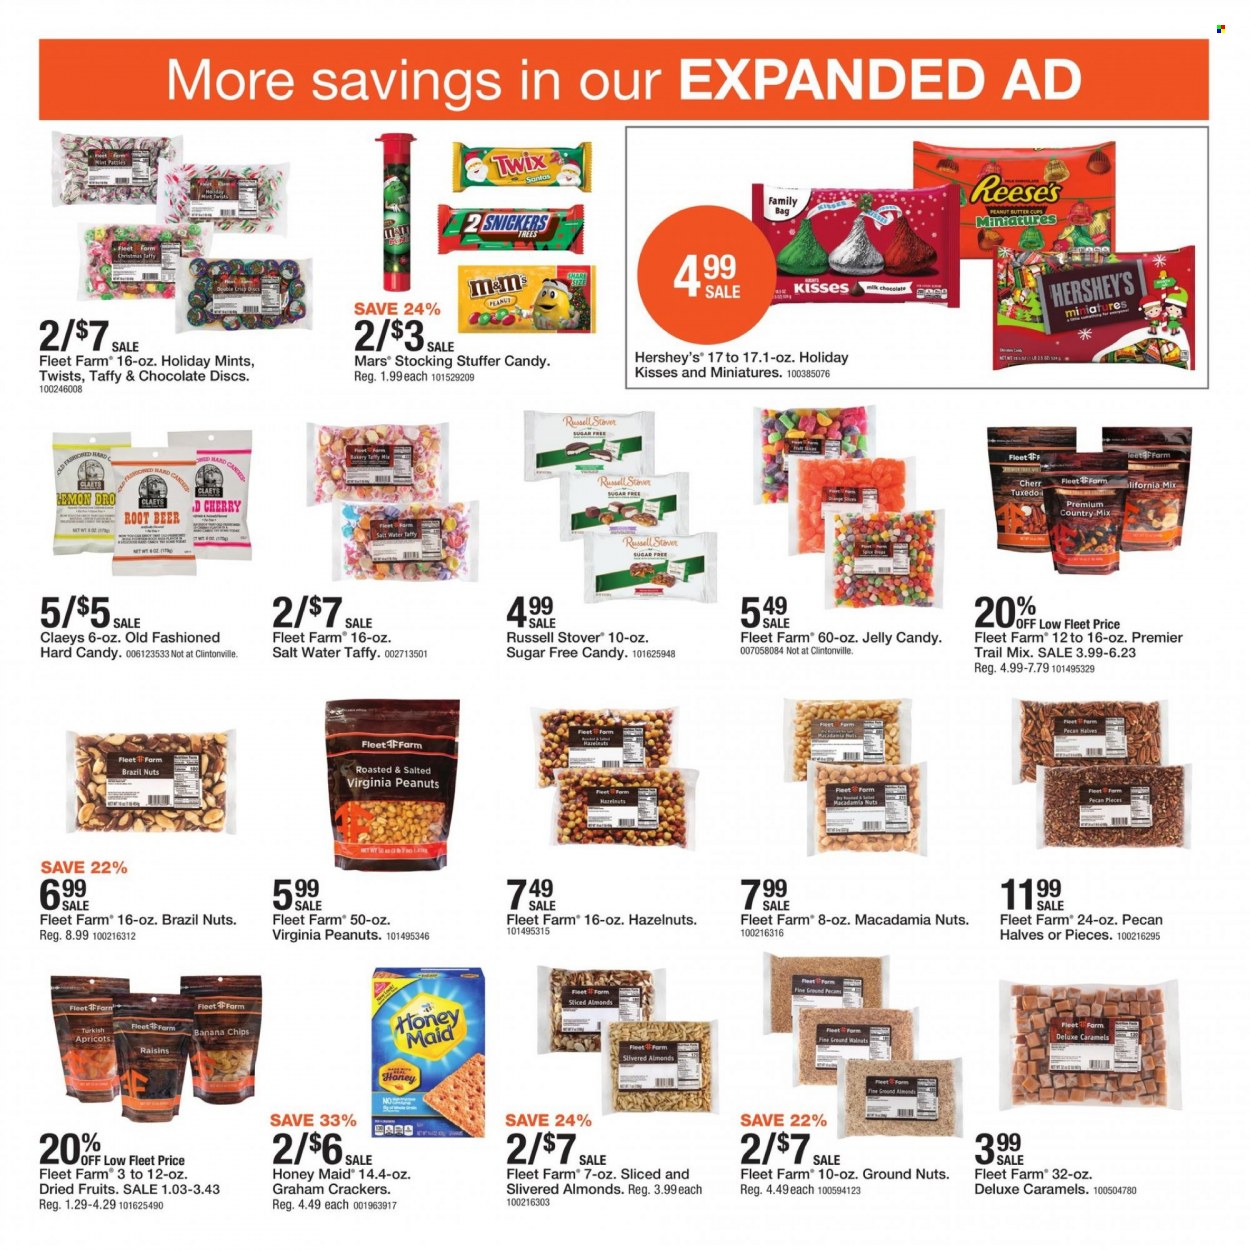 thumbnail - Fleet Farm Flyer - 11/19/2021 - 11/27/2021 - Sales products - graham crackers, milk chocolate, chocolate, Snickers, Twix, Mars, jelly, crackers, jelly candy, Reese's, Hershey's, peanut butter cups, Honey Maid, almonds, macadamia nuts, raisins, walnuts, hazelnuts, peanuts, pecans, dried fruit, apricots, banana chips, trail mix, brazil nuts, beer, bag. Page 33.